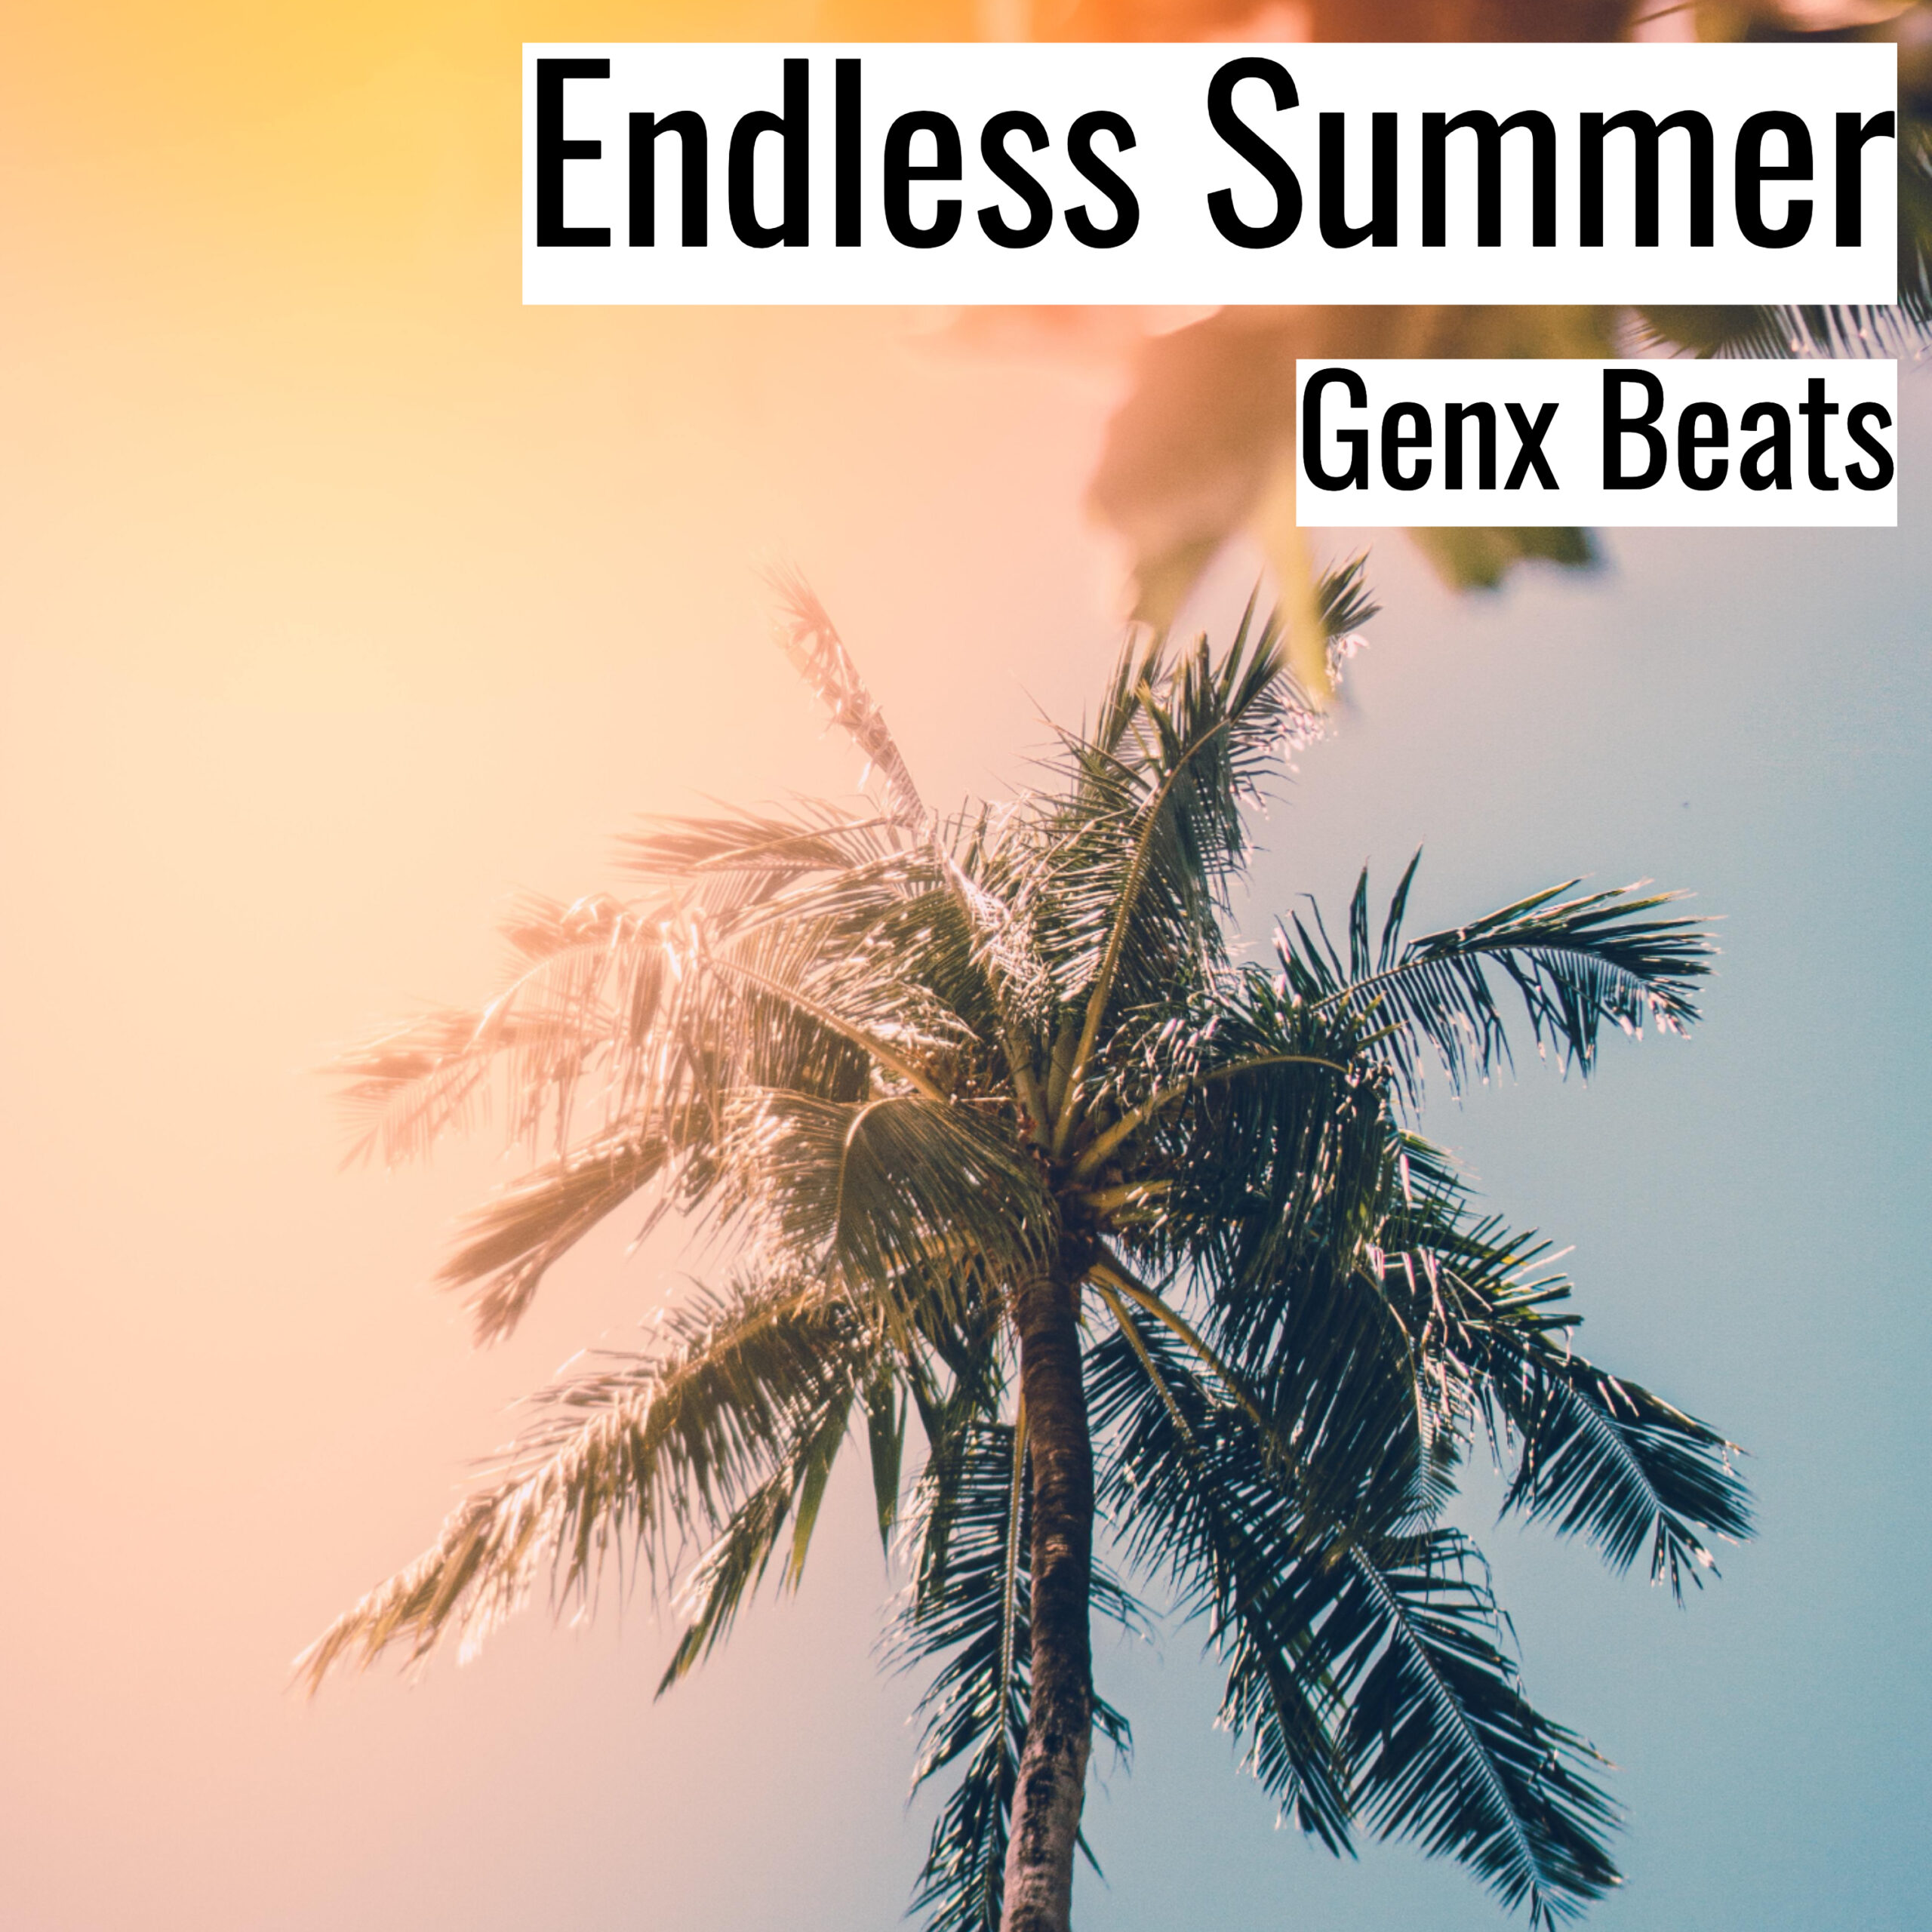 Endless Summer scaled